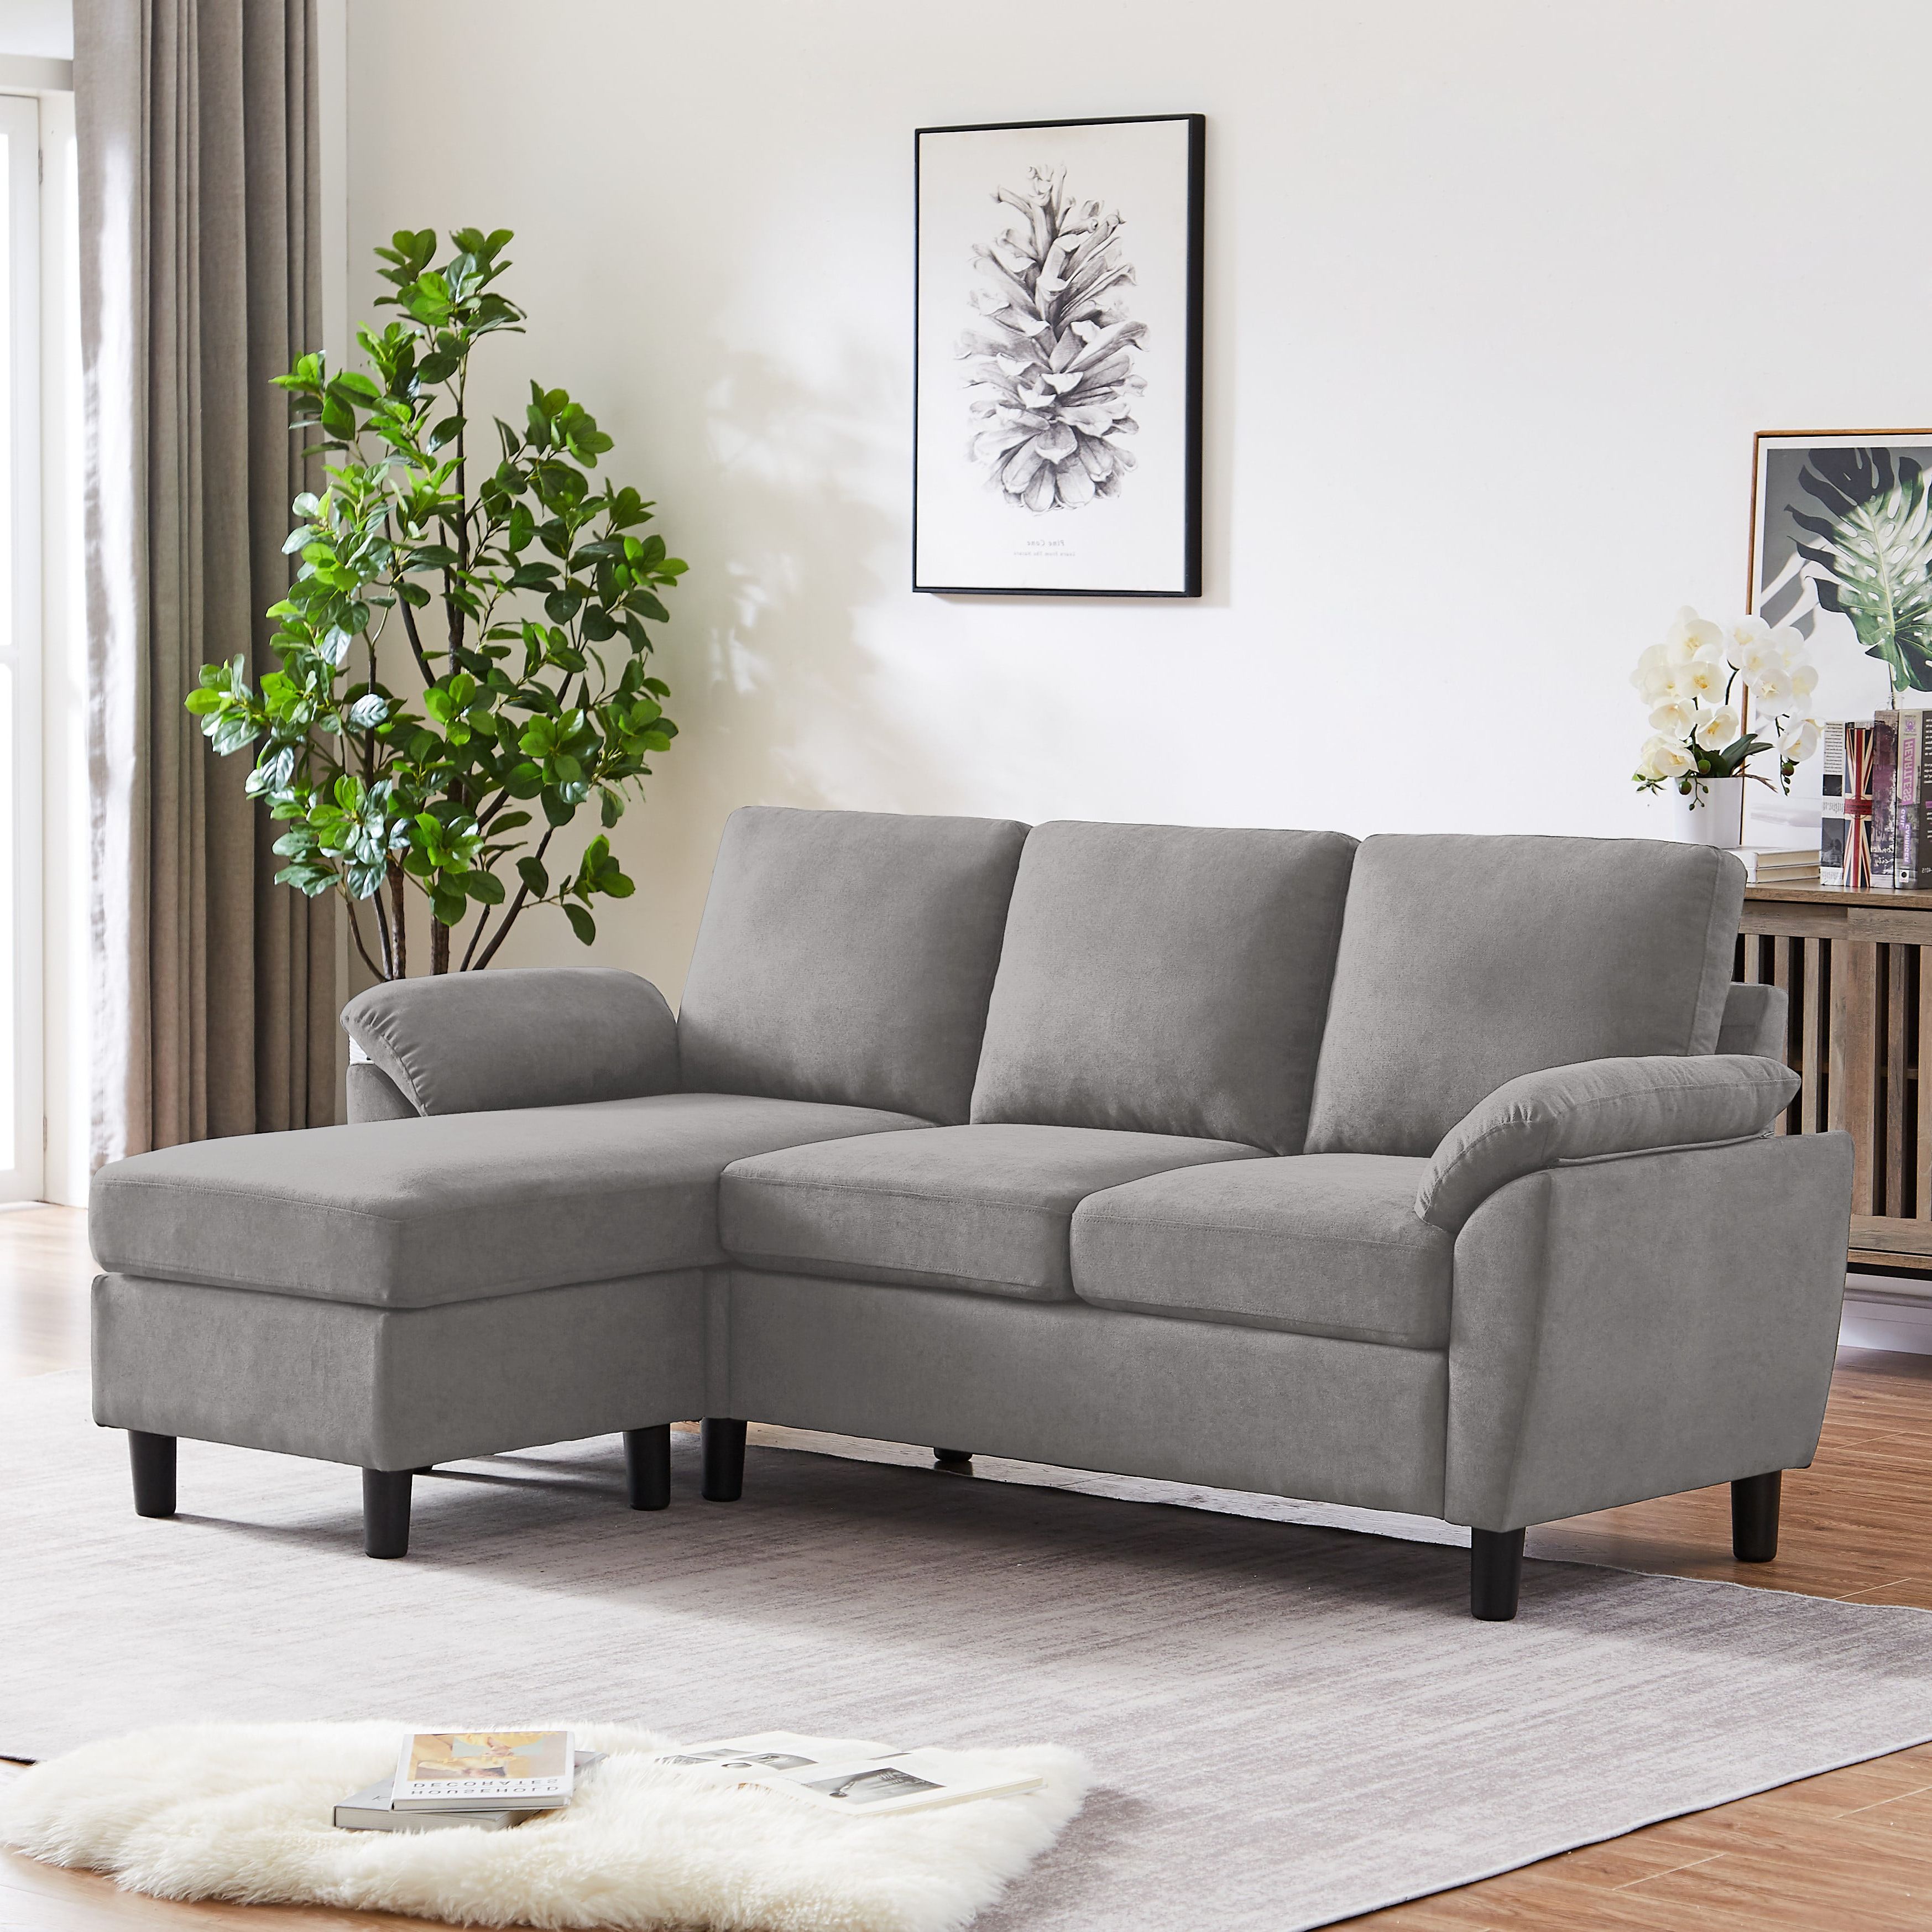 Jarenie Modern Fabric L Shapped Sofa Sectional Couches For Living Room Convertible  Sofa With Matching Chaise For Office, Apartment, Studio – Walmart With Regard To Convertible Sofas With Matching Chaise (Gallery 3 of 20)